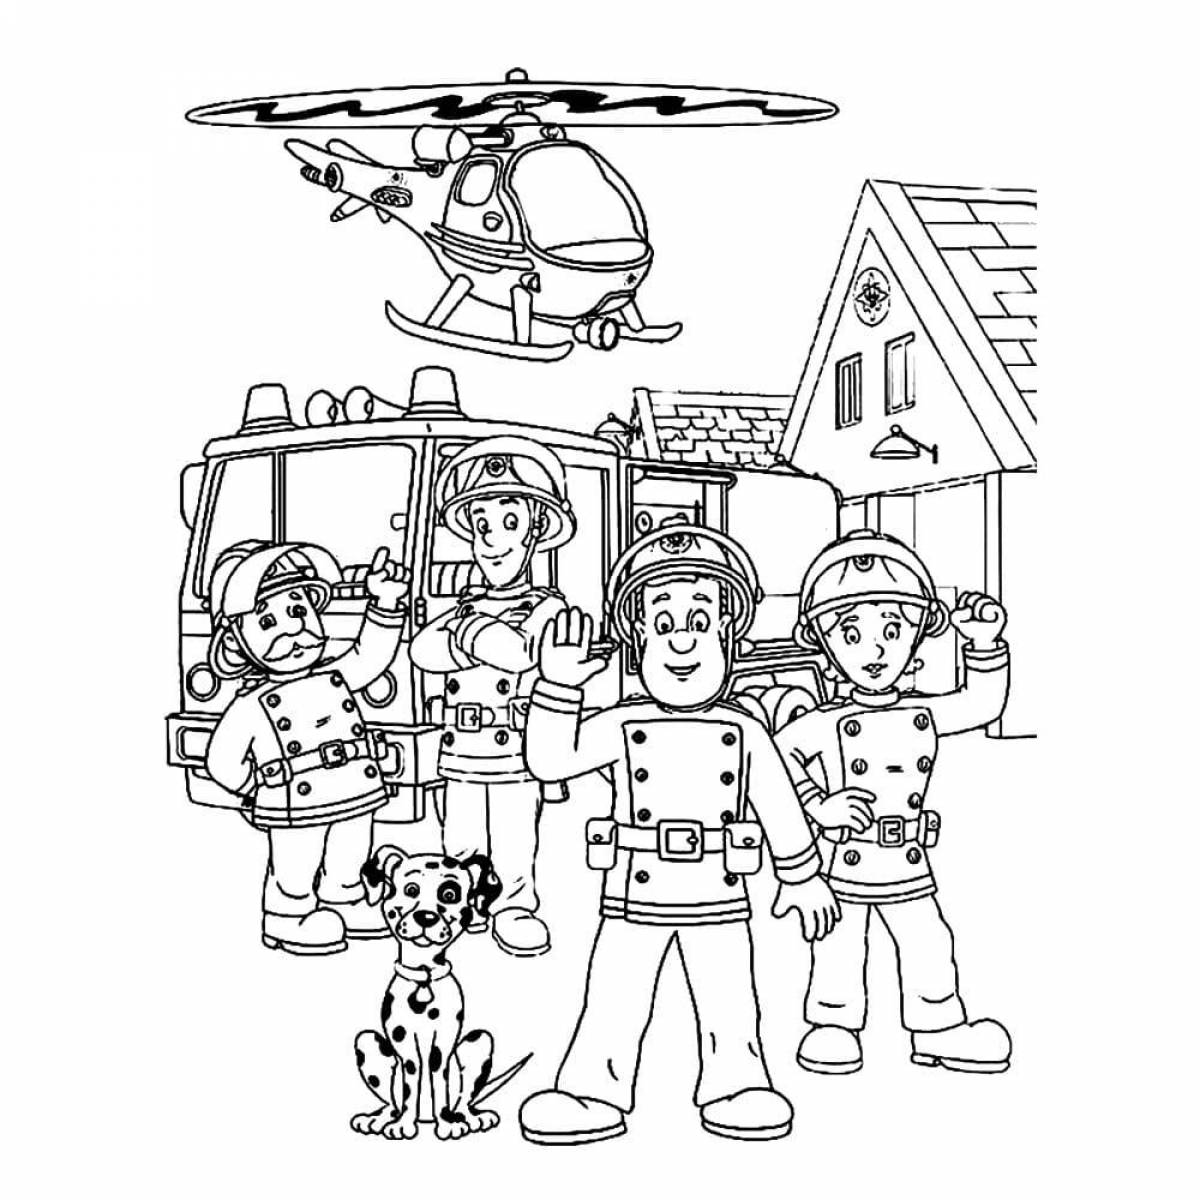 Cute firefighter coloring pages for kids